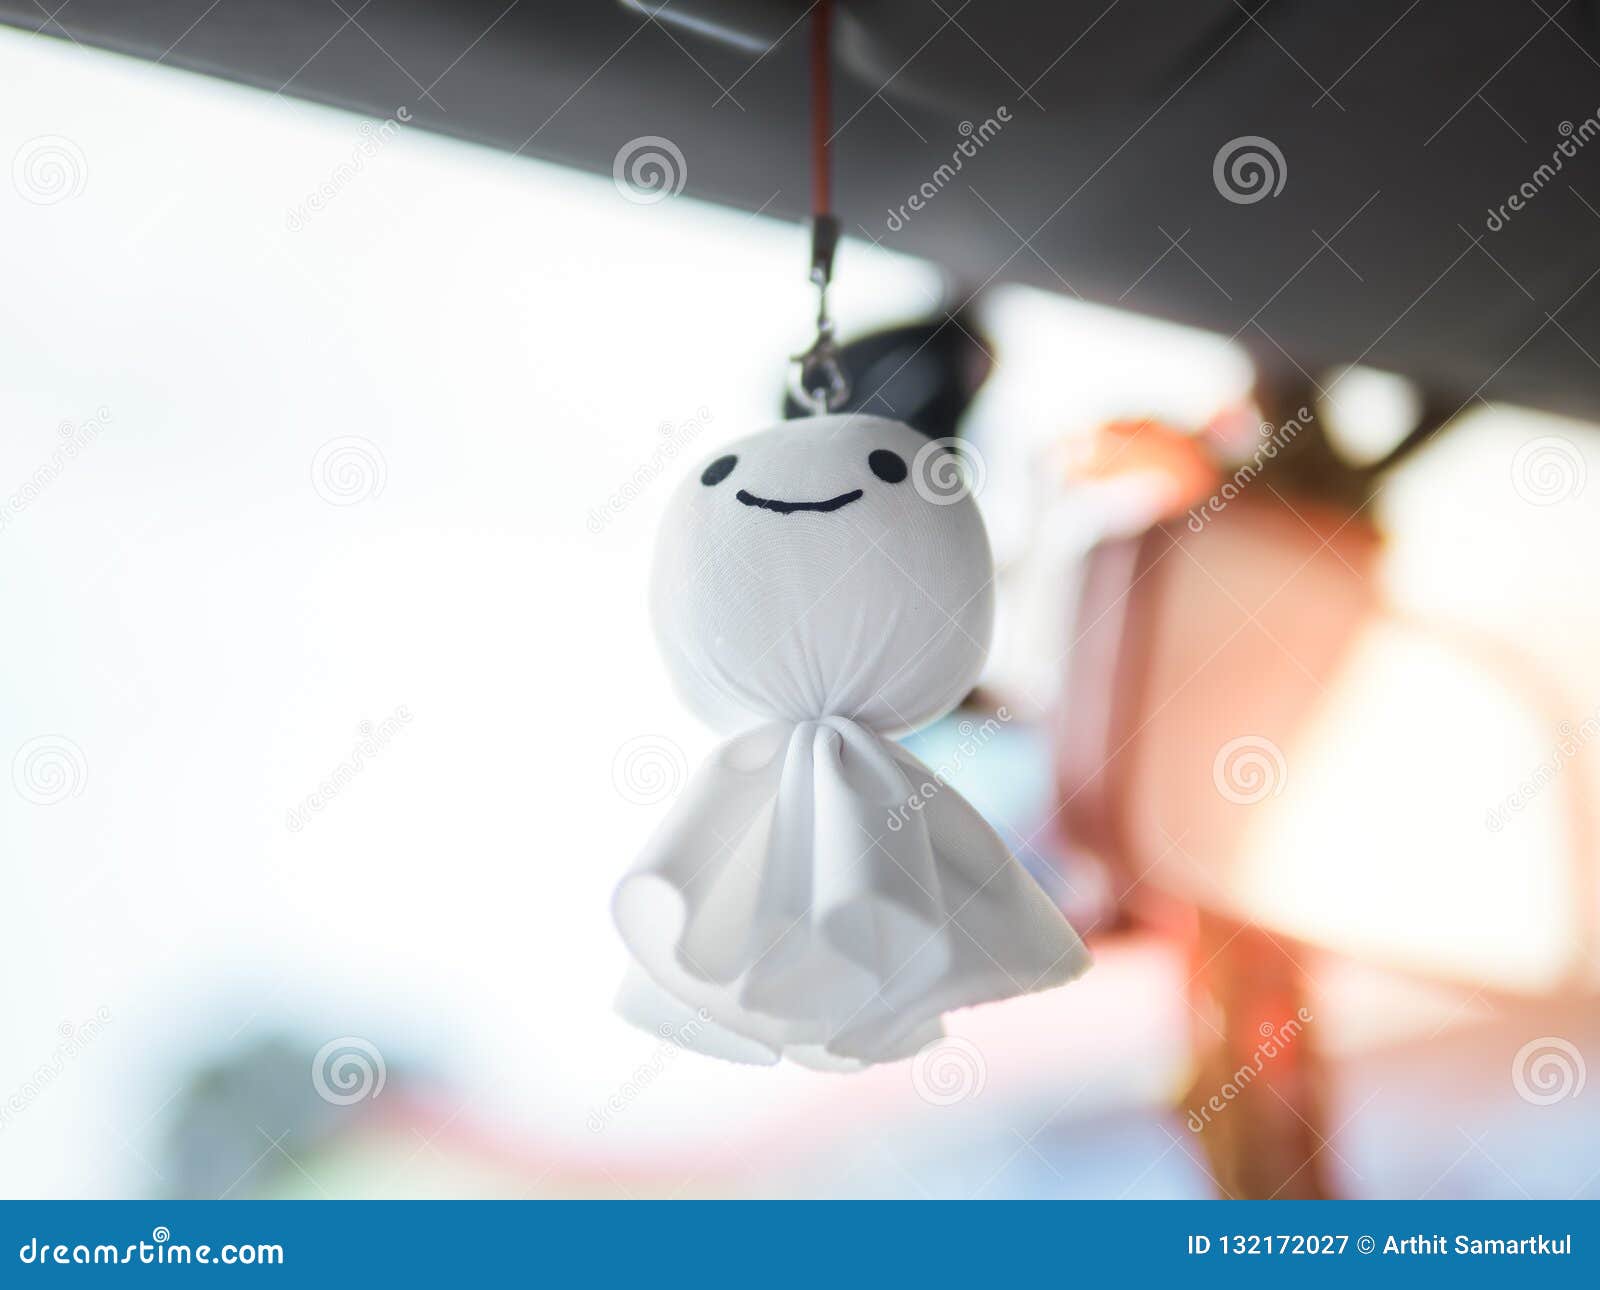 Teru Teru Bozu Japanese Smile Doll That Believe To Bring Good Weather Or Prevent Rain Stock Image Image Of Light Blue